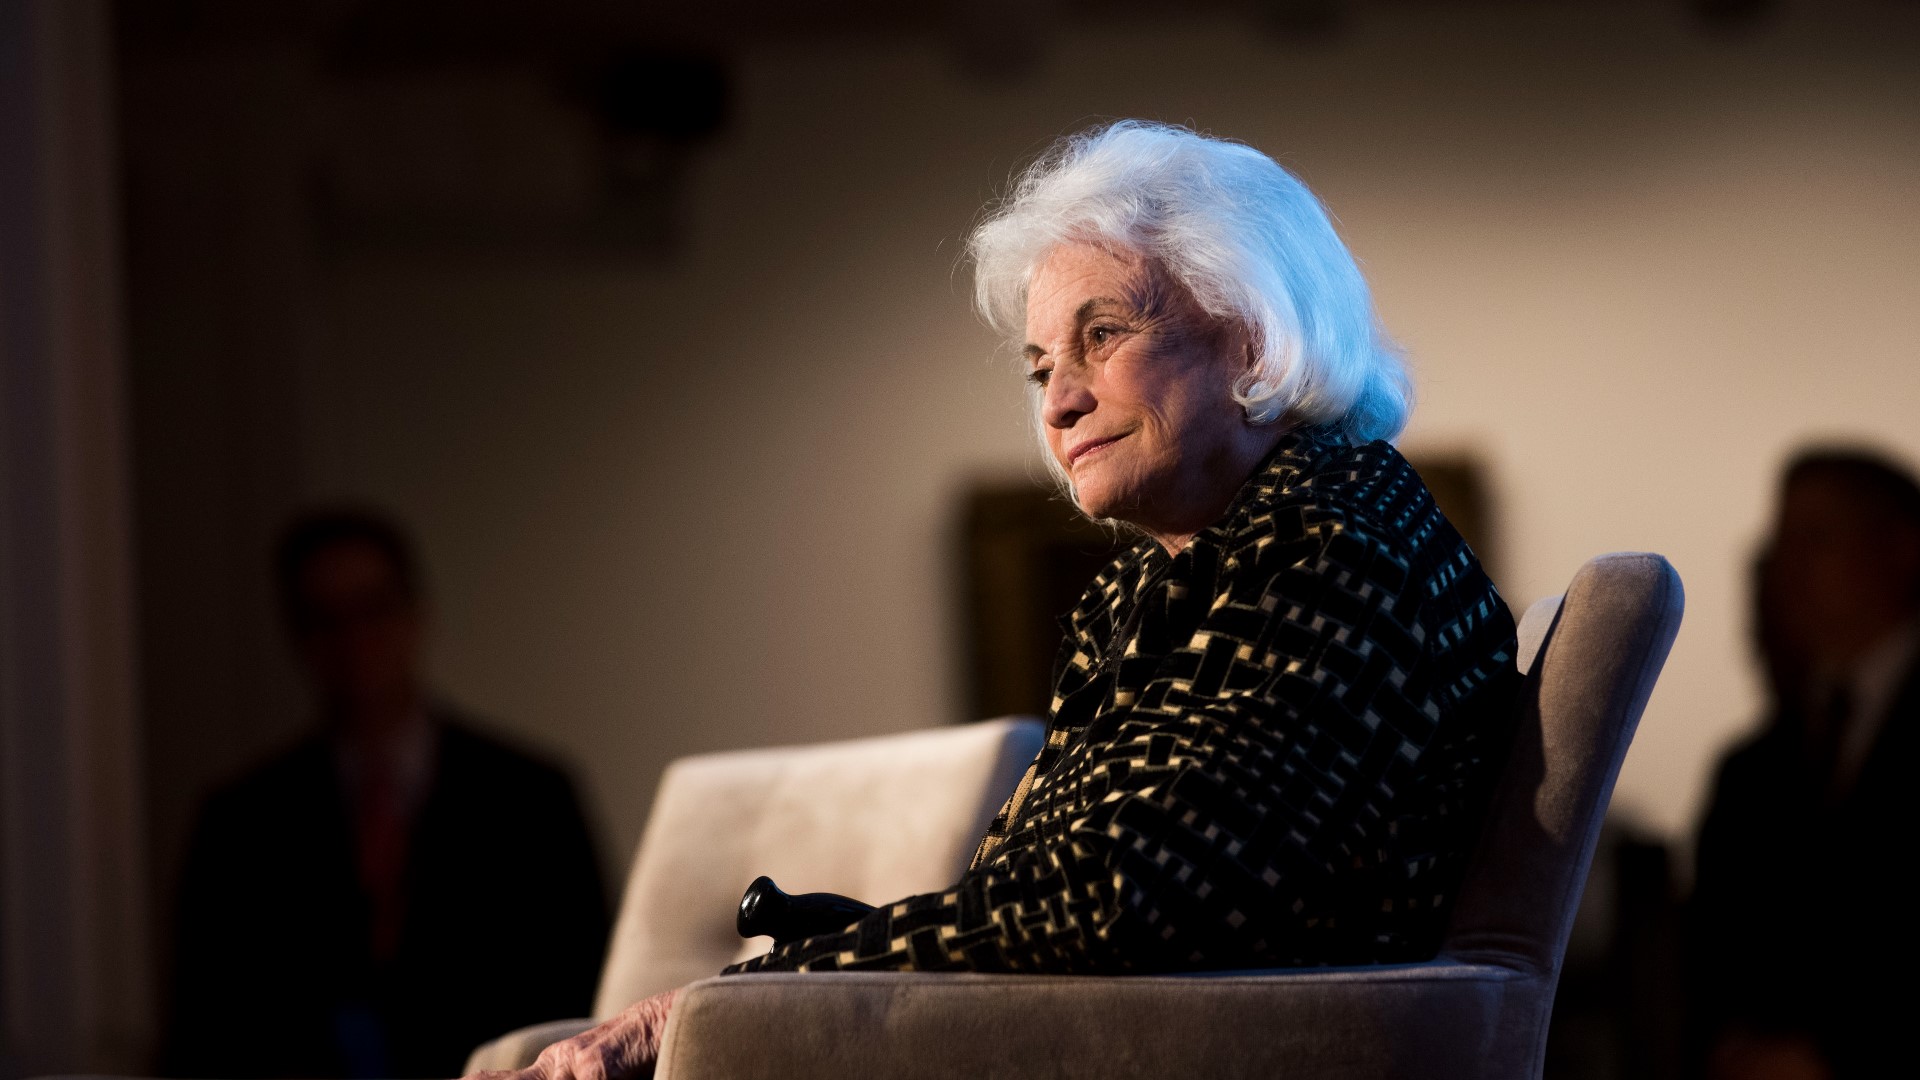 Sandra Day O'Connor, former Arizona State Senator and first woman on the U.S. Supreme Court has died. She was 93.